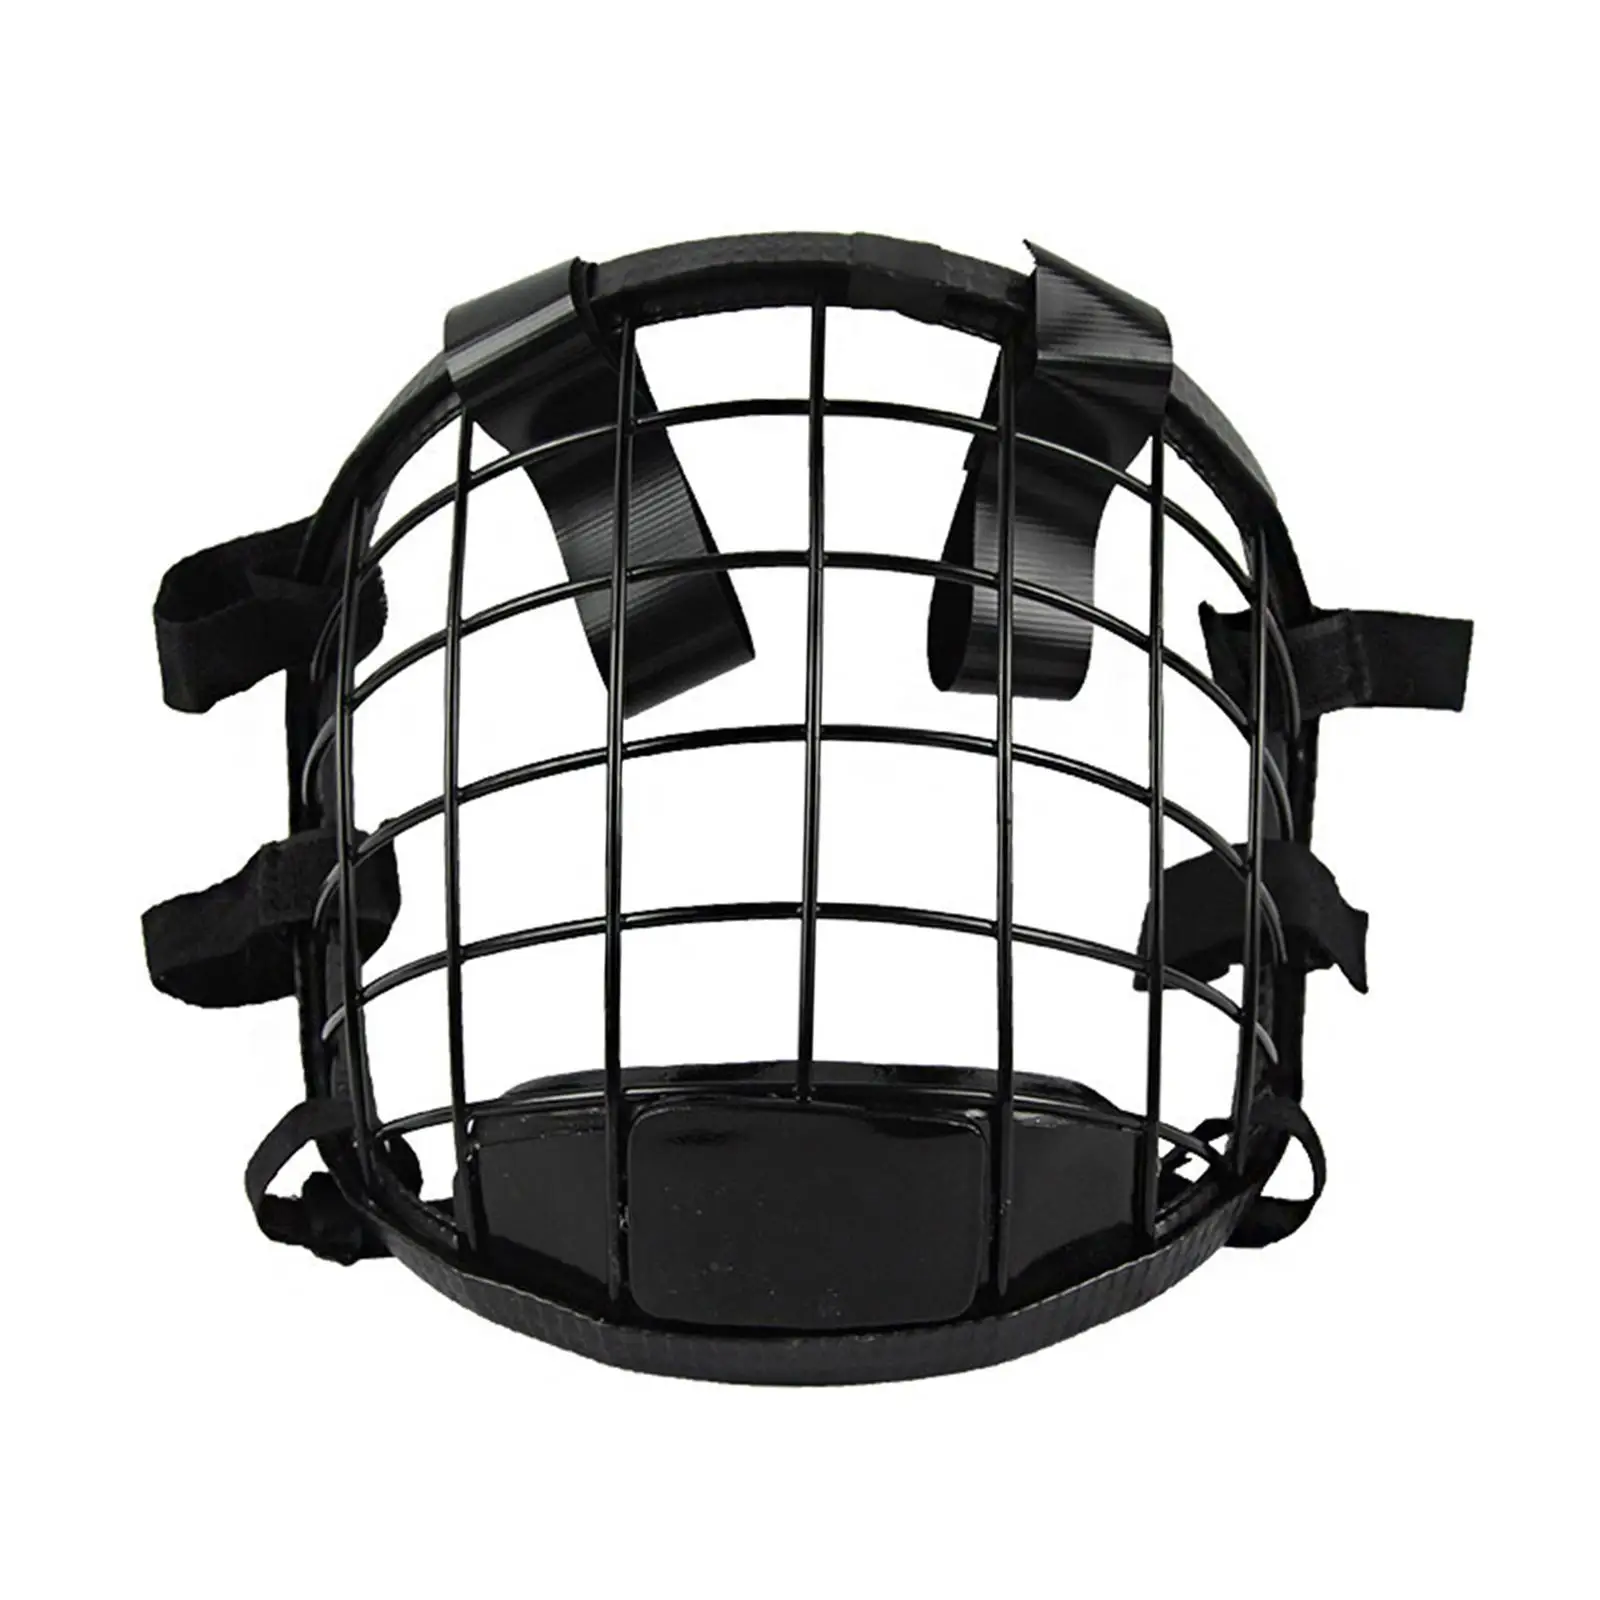 Metal Taekwondo Guard Child Removable Face Protective Face Guard Training Gear for Sparring Sanda Grappling Kickboxing